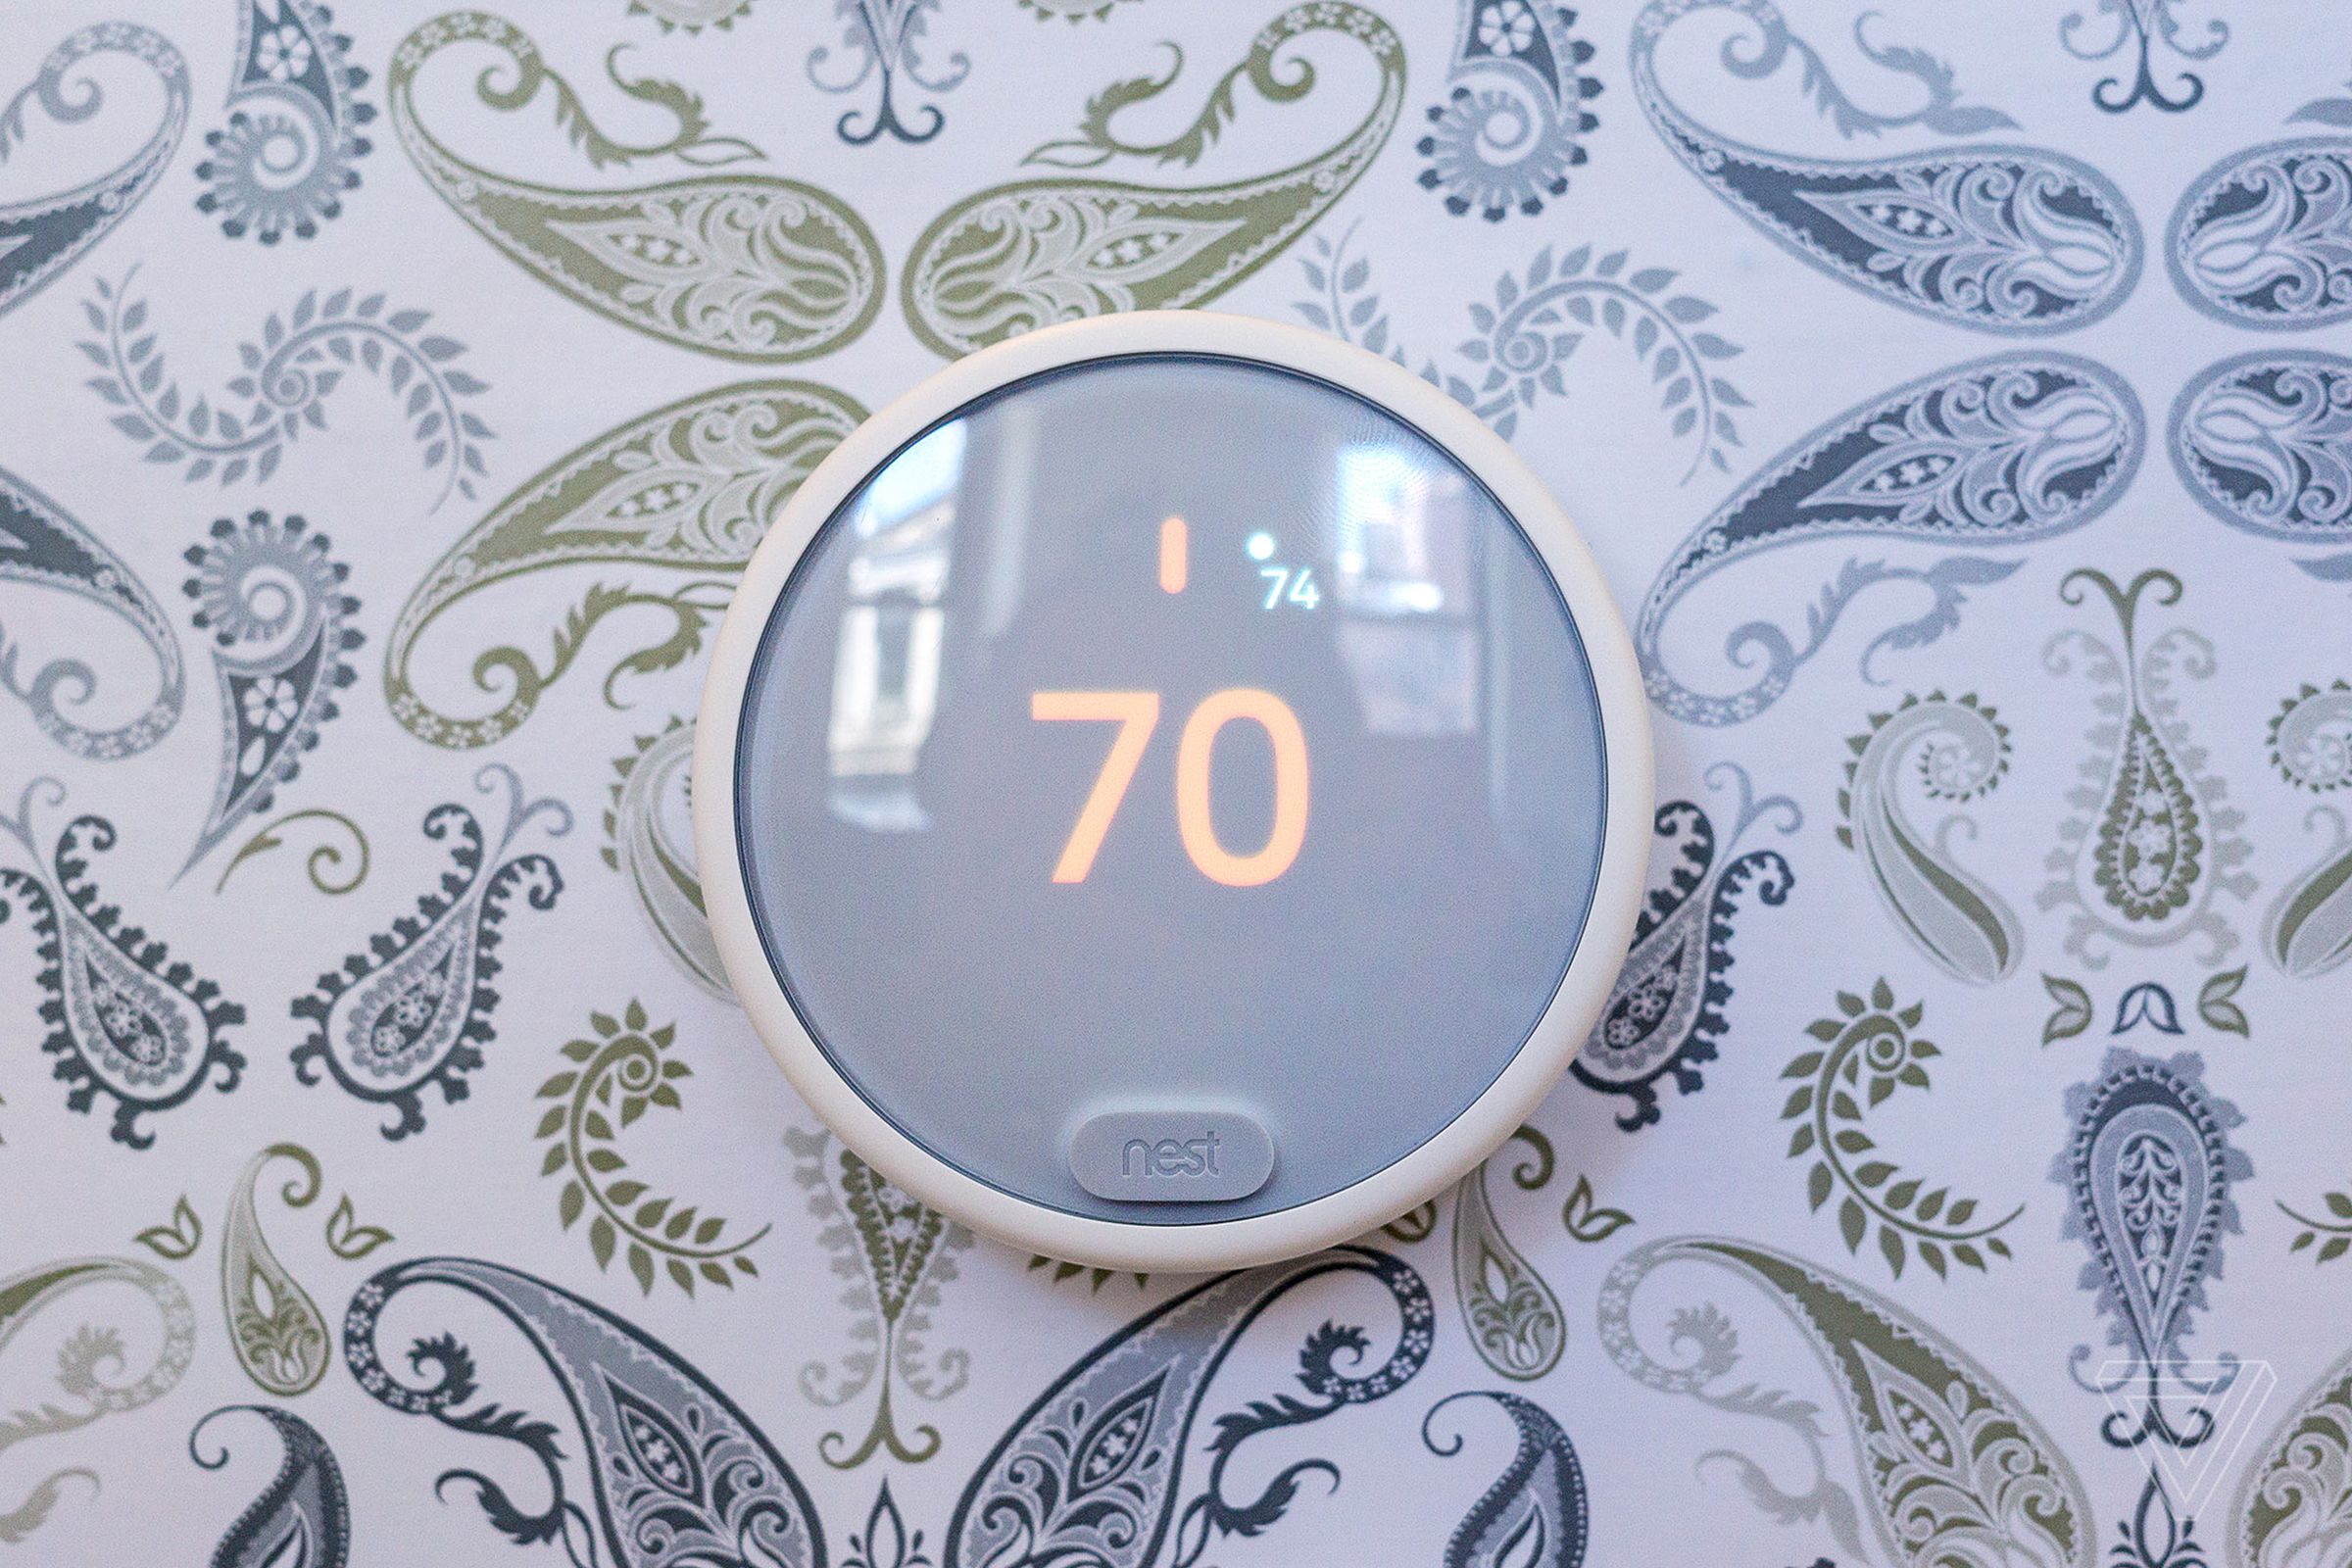 Nest E smart thermostat on wall with paisley wallpaper